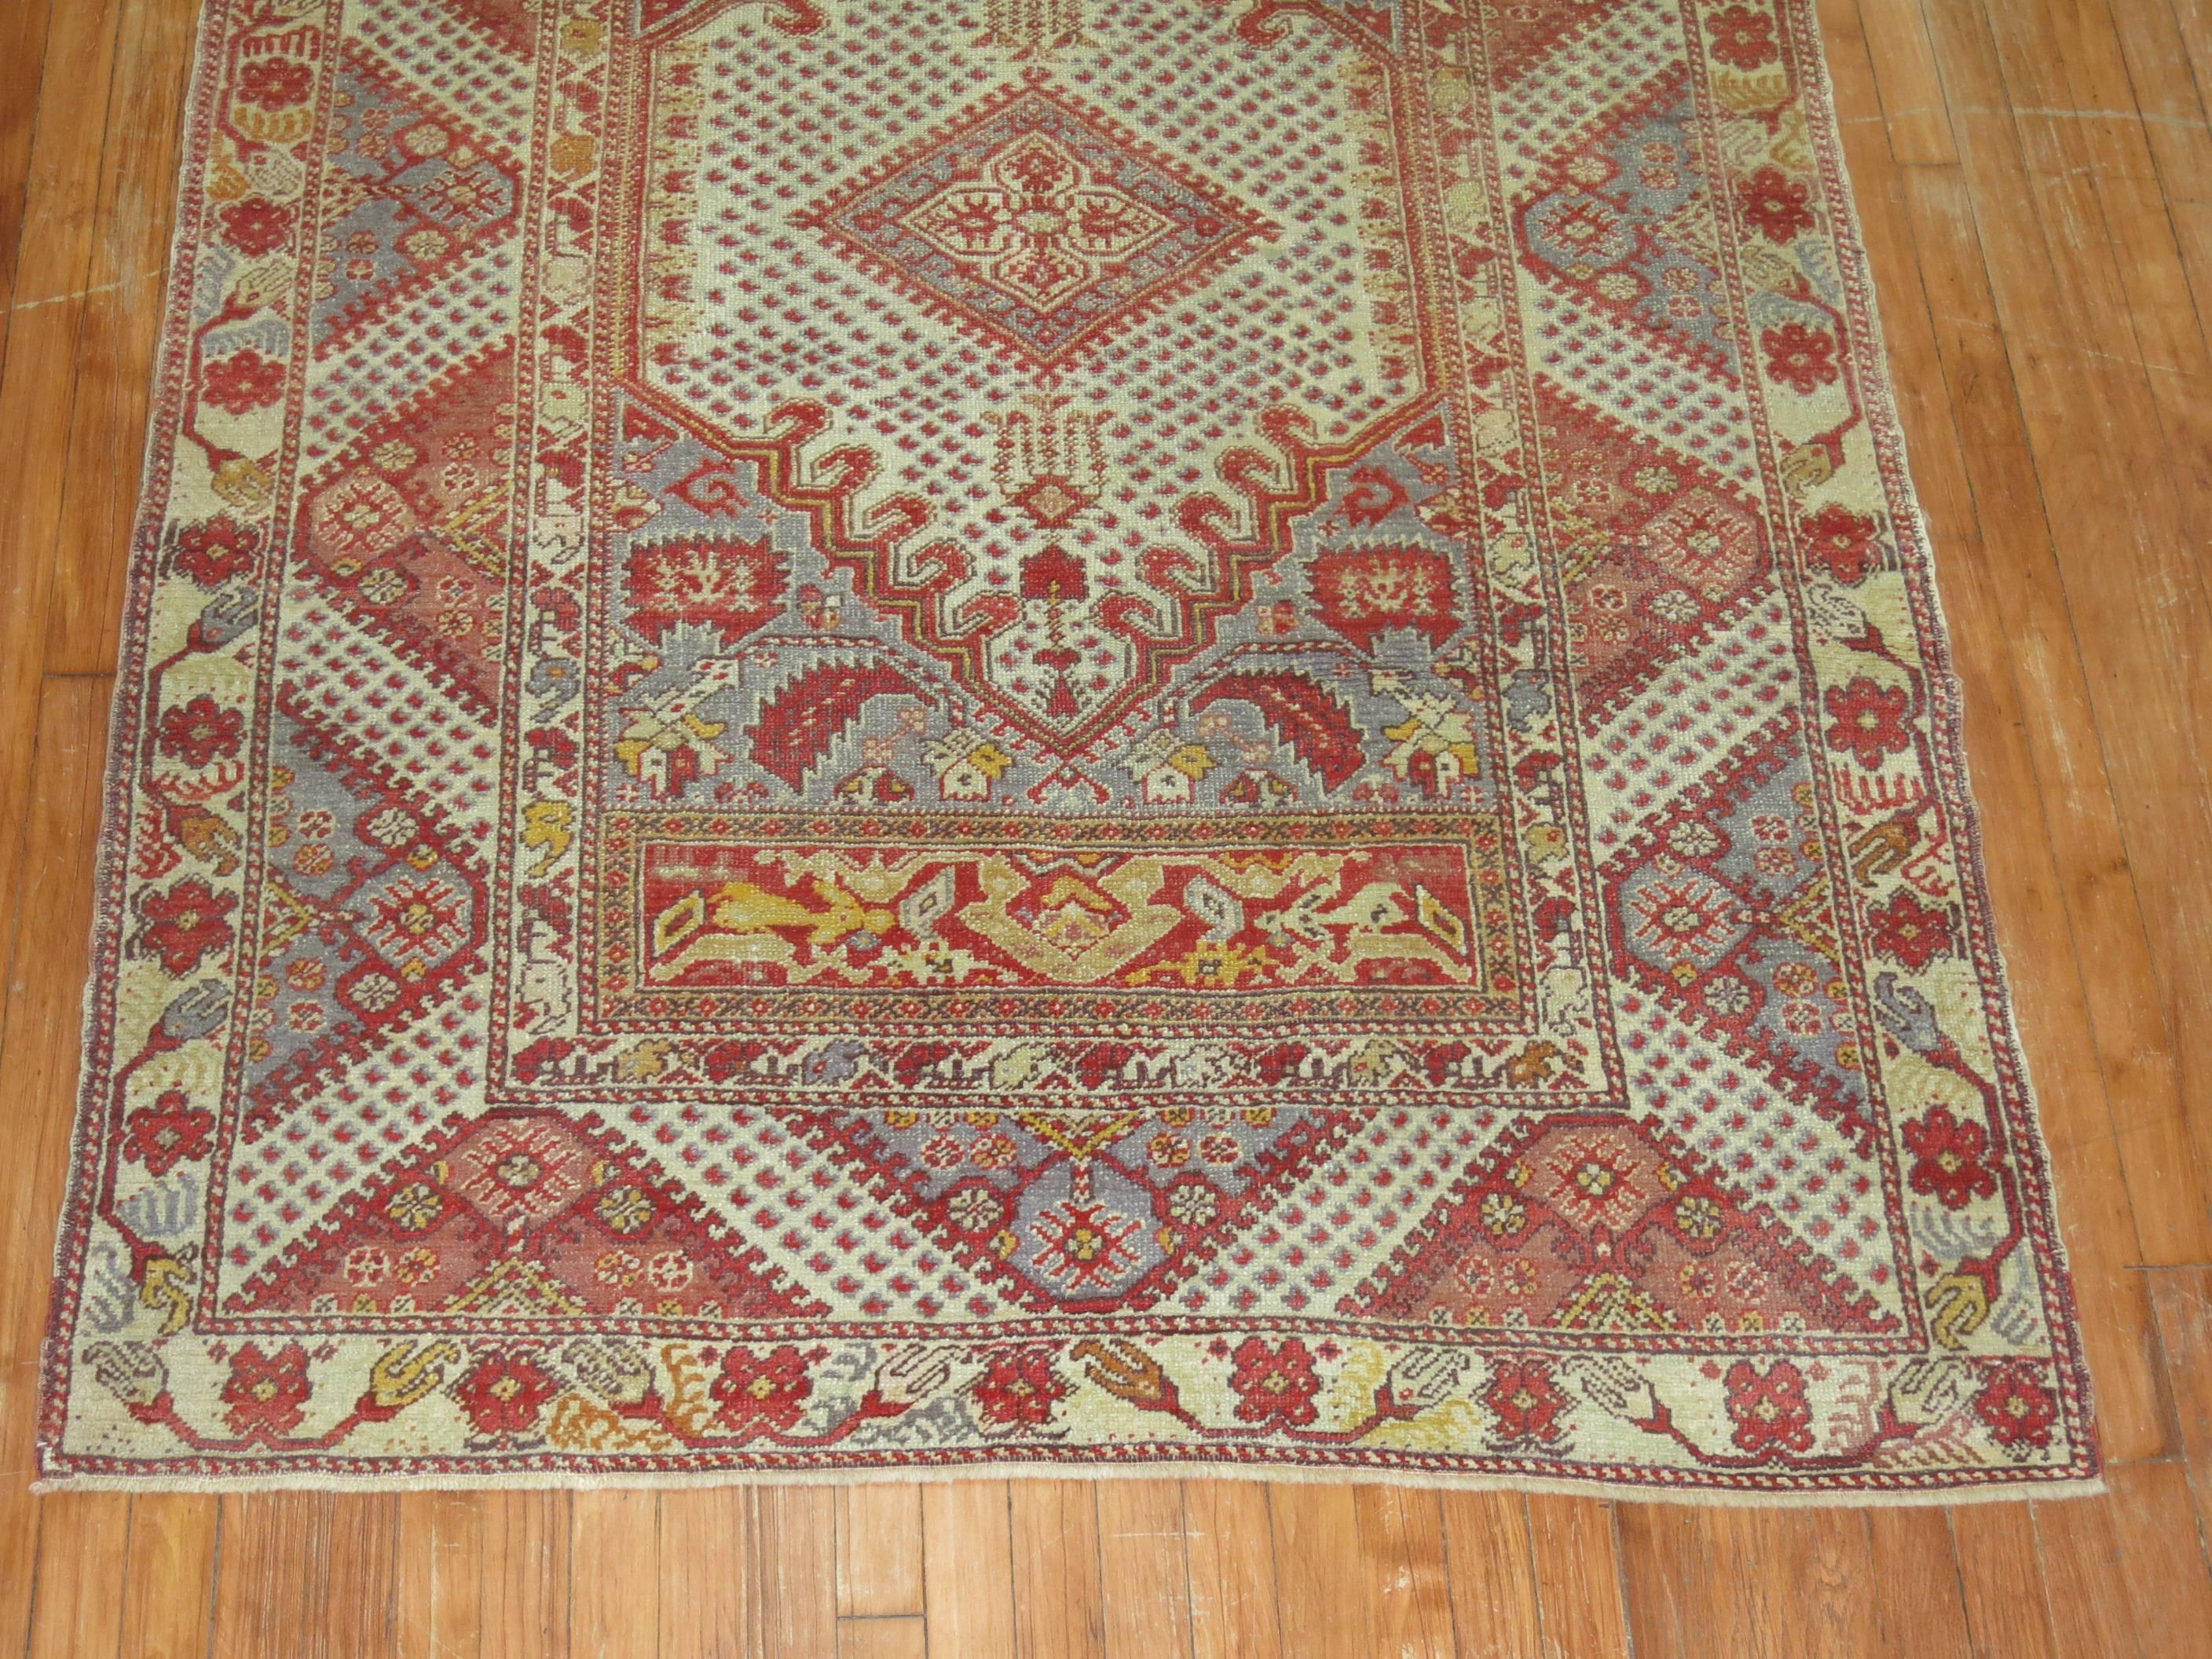 Authentic one of a kind Turkish Ghiordes rug.

4'7'' x 7'2''

Since the beginning of their production in the 18th century, rugs from the Turkish town, Ghiordes have mostly been known for their rectilinear, colorful, multi-bordered antique prayer